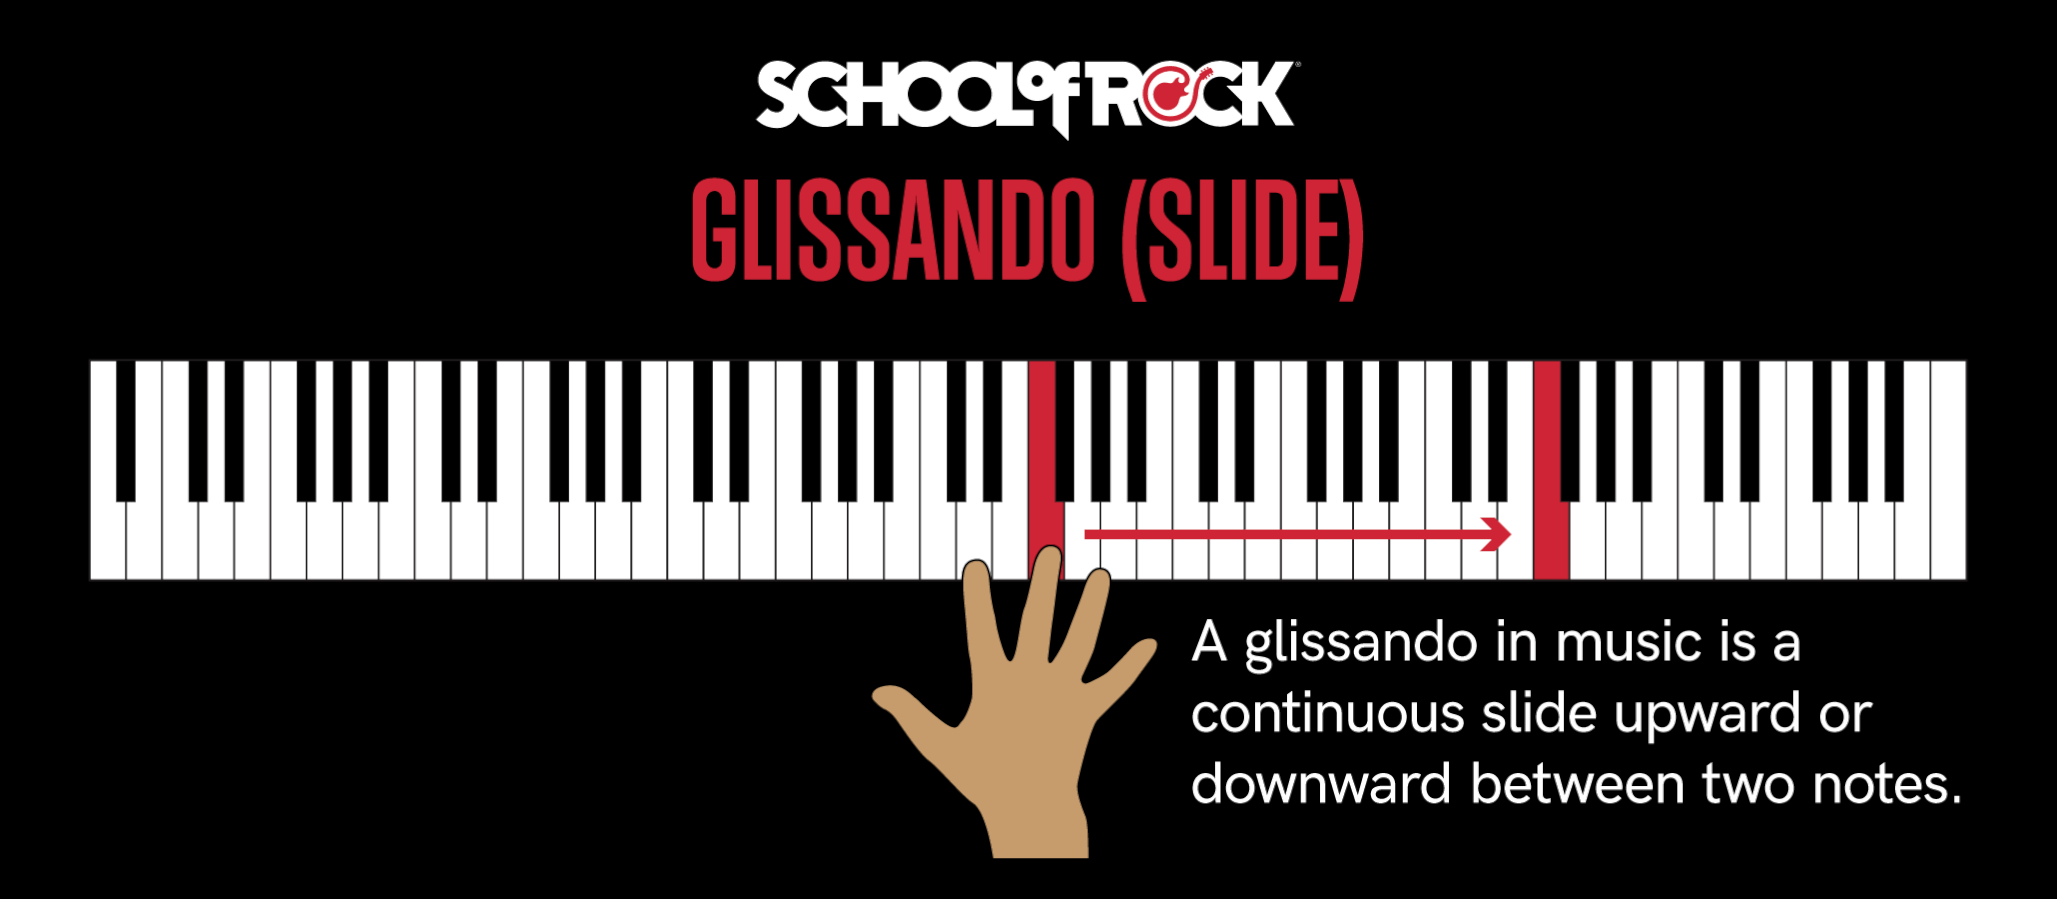 A glissando in music is a continuous slide upward or downward between two notes